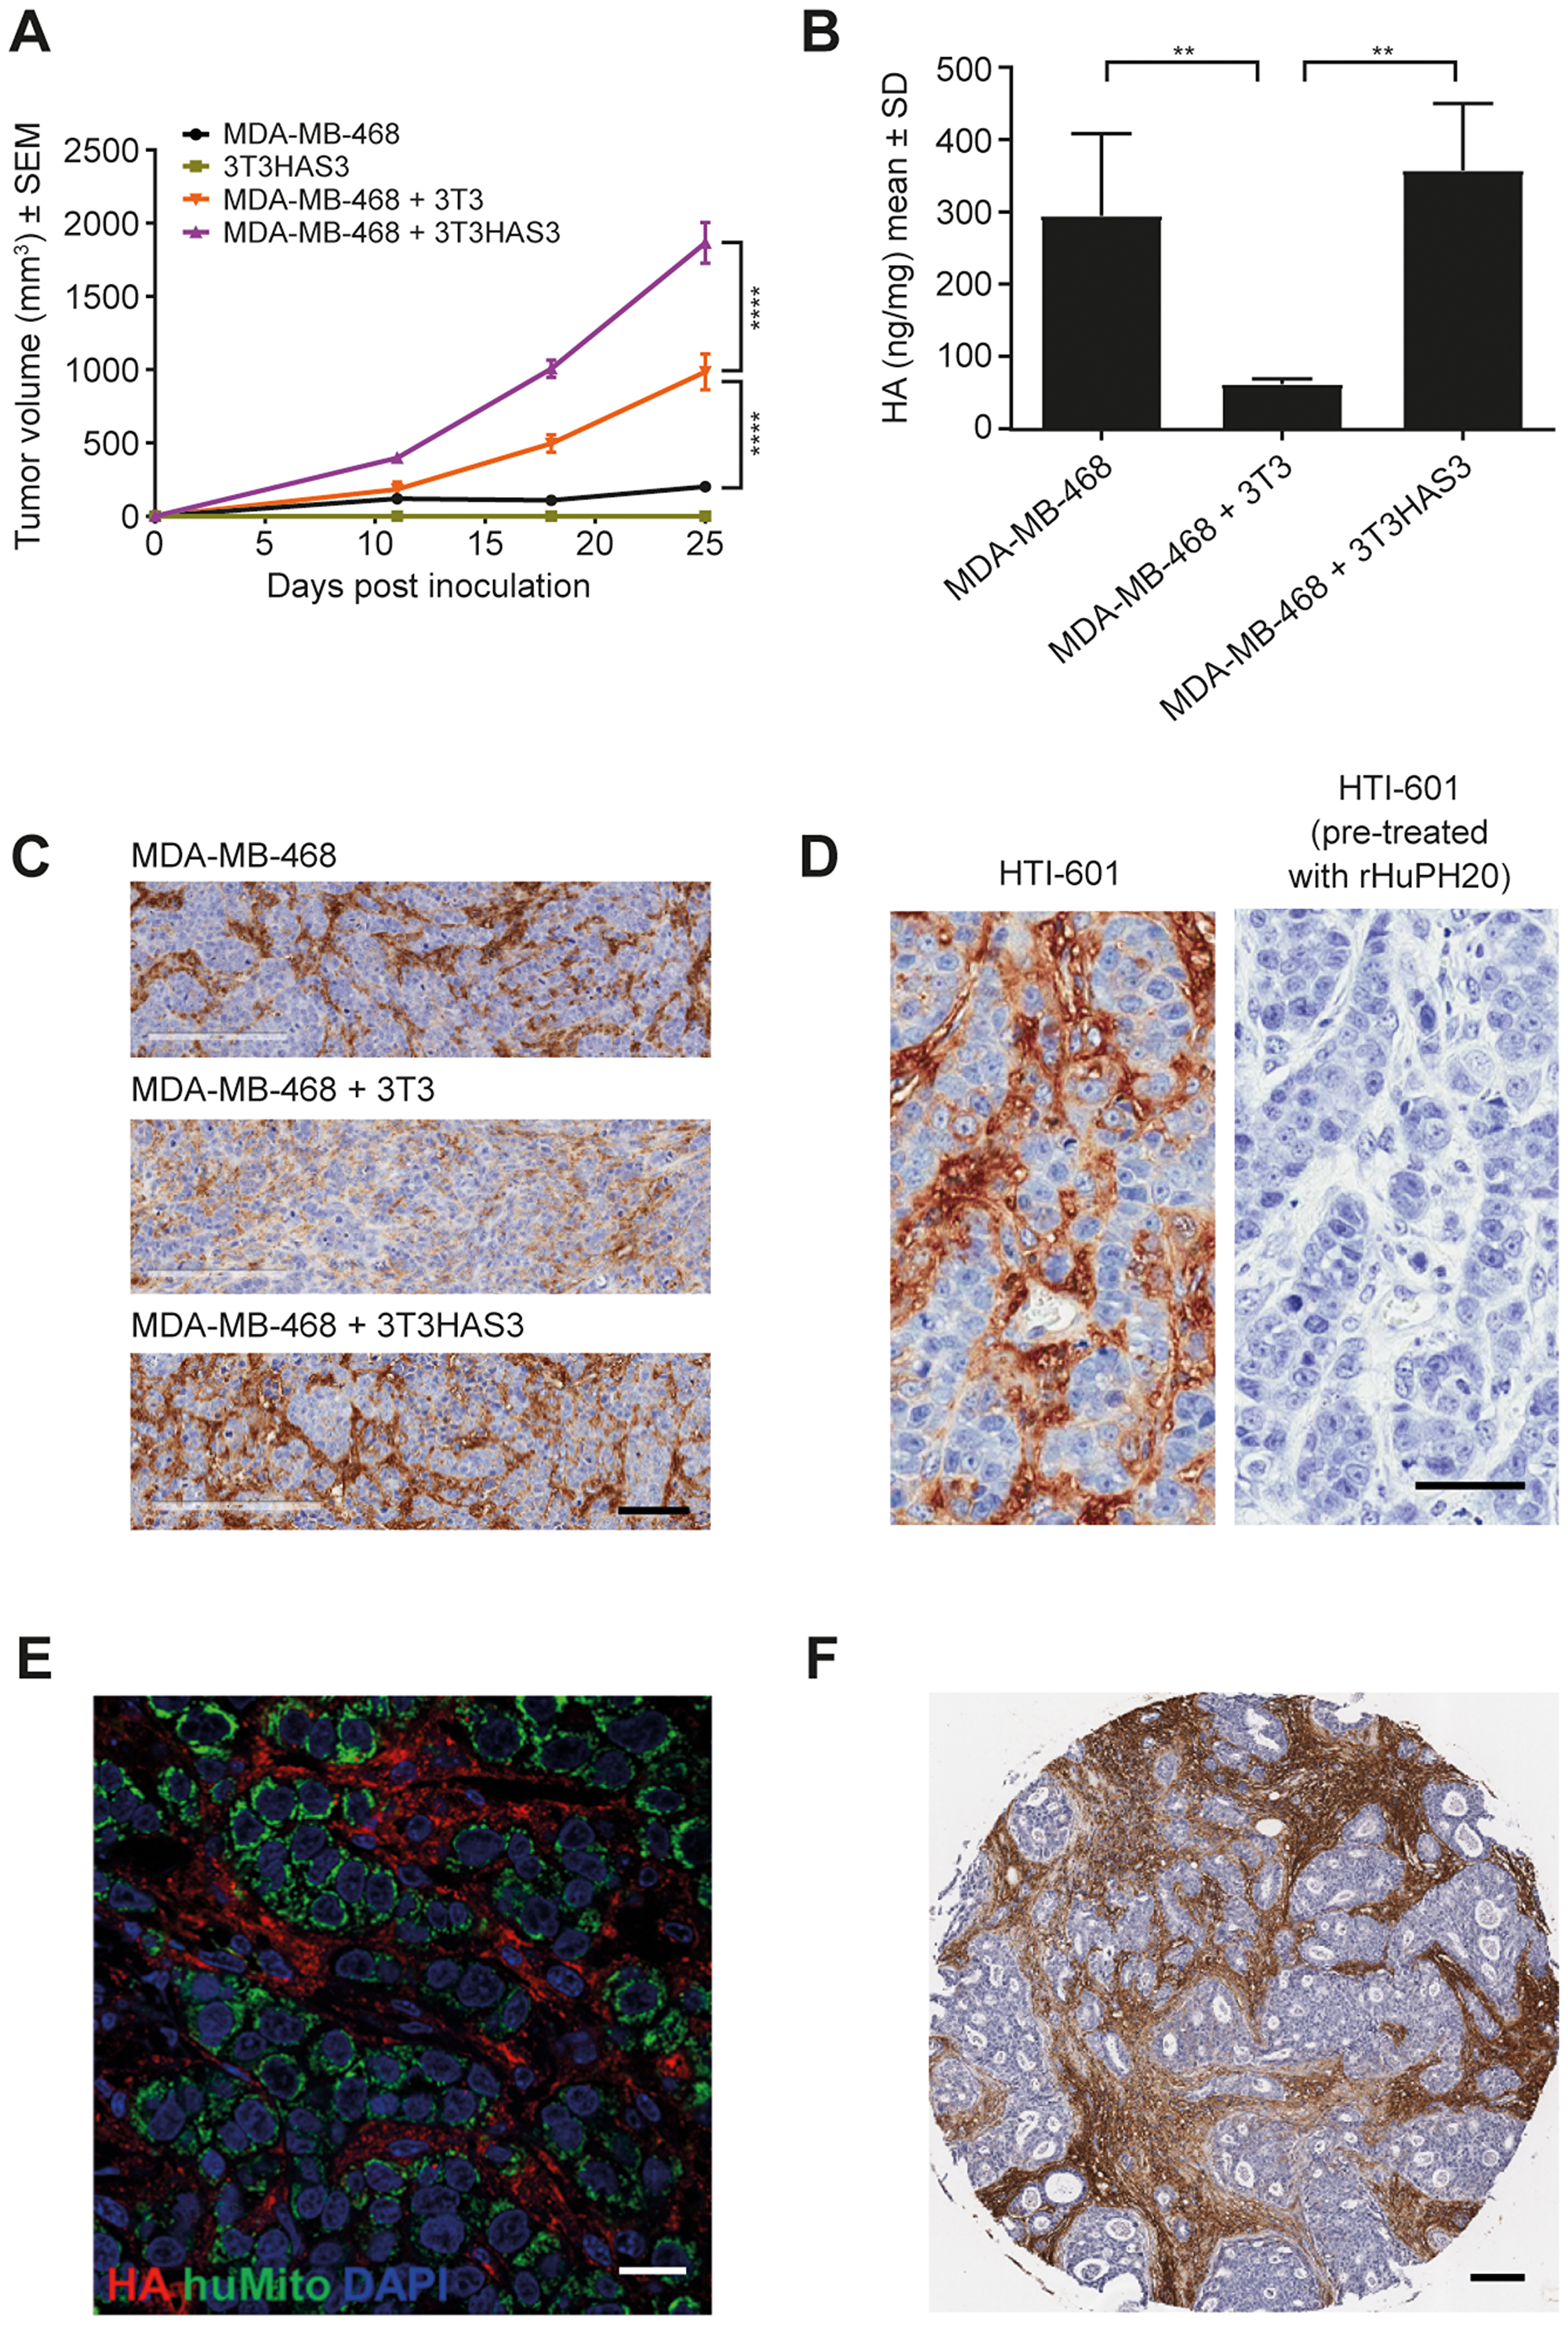 Engineered HA-accumulating fibroblast cells promoted in vivo tumor growth in the MDA-MB-468 breast cancer model.